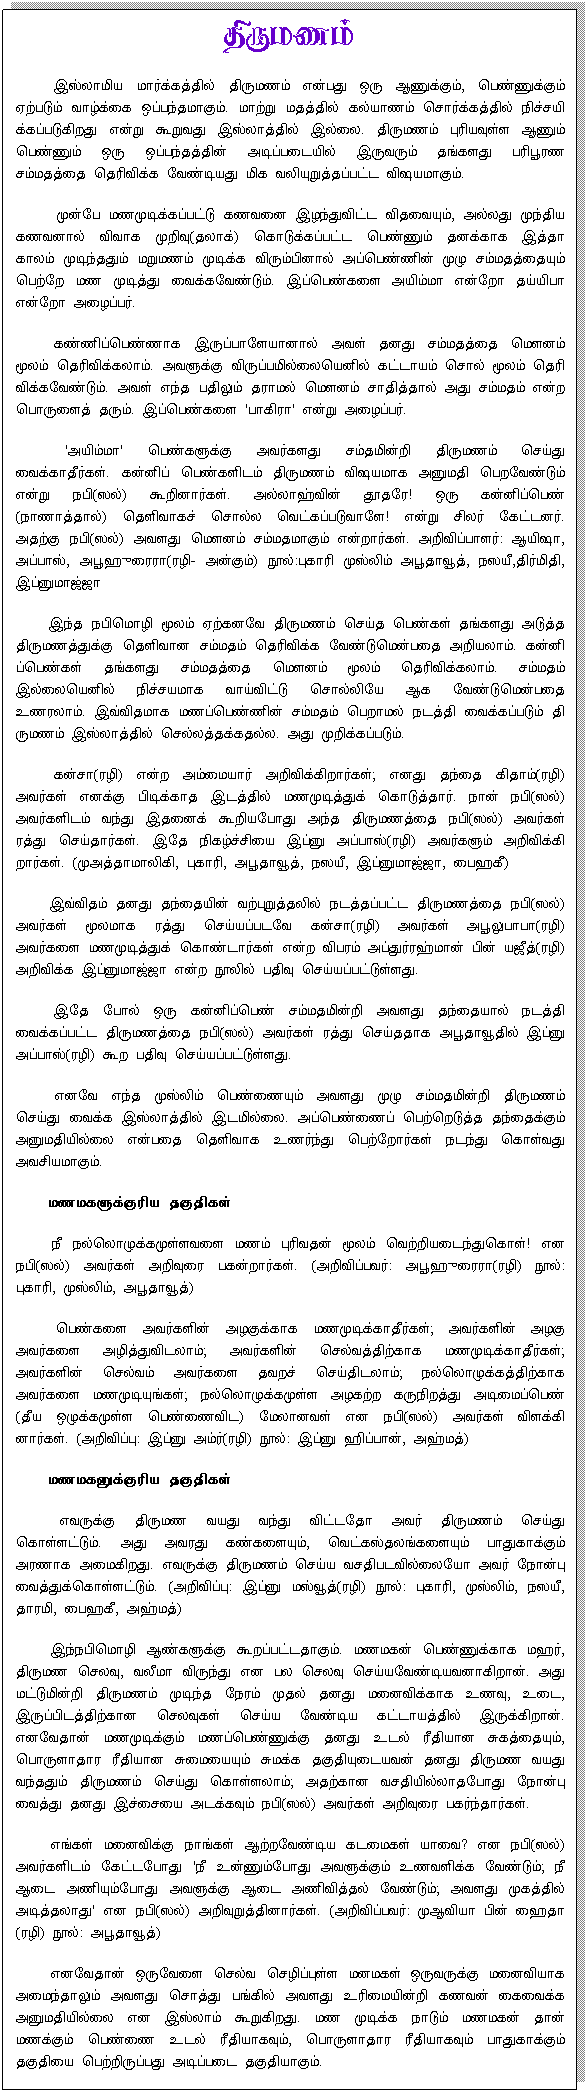 Tamil Article About Muslim Marriage